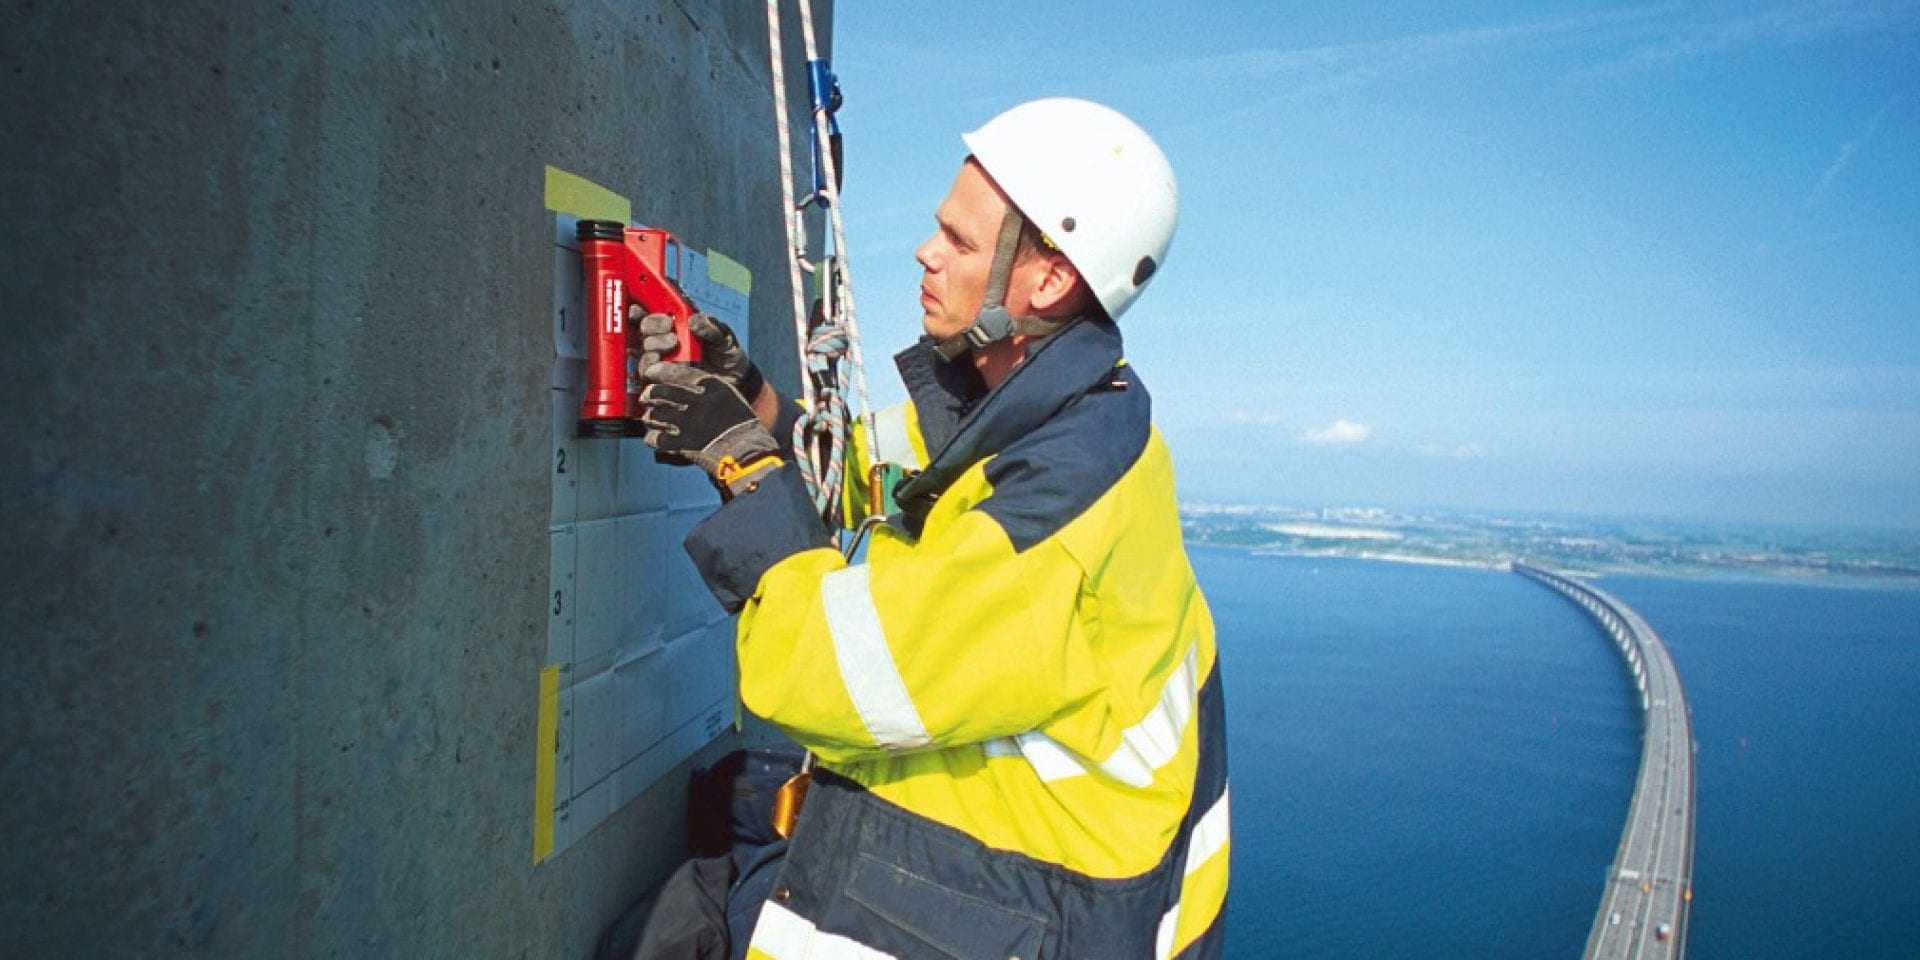 Hilti design guidelines for modular support systems